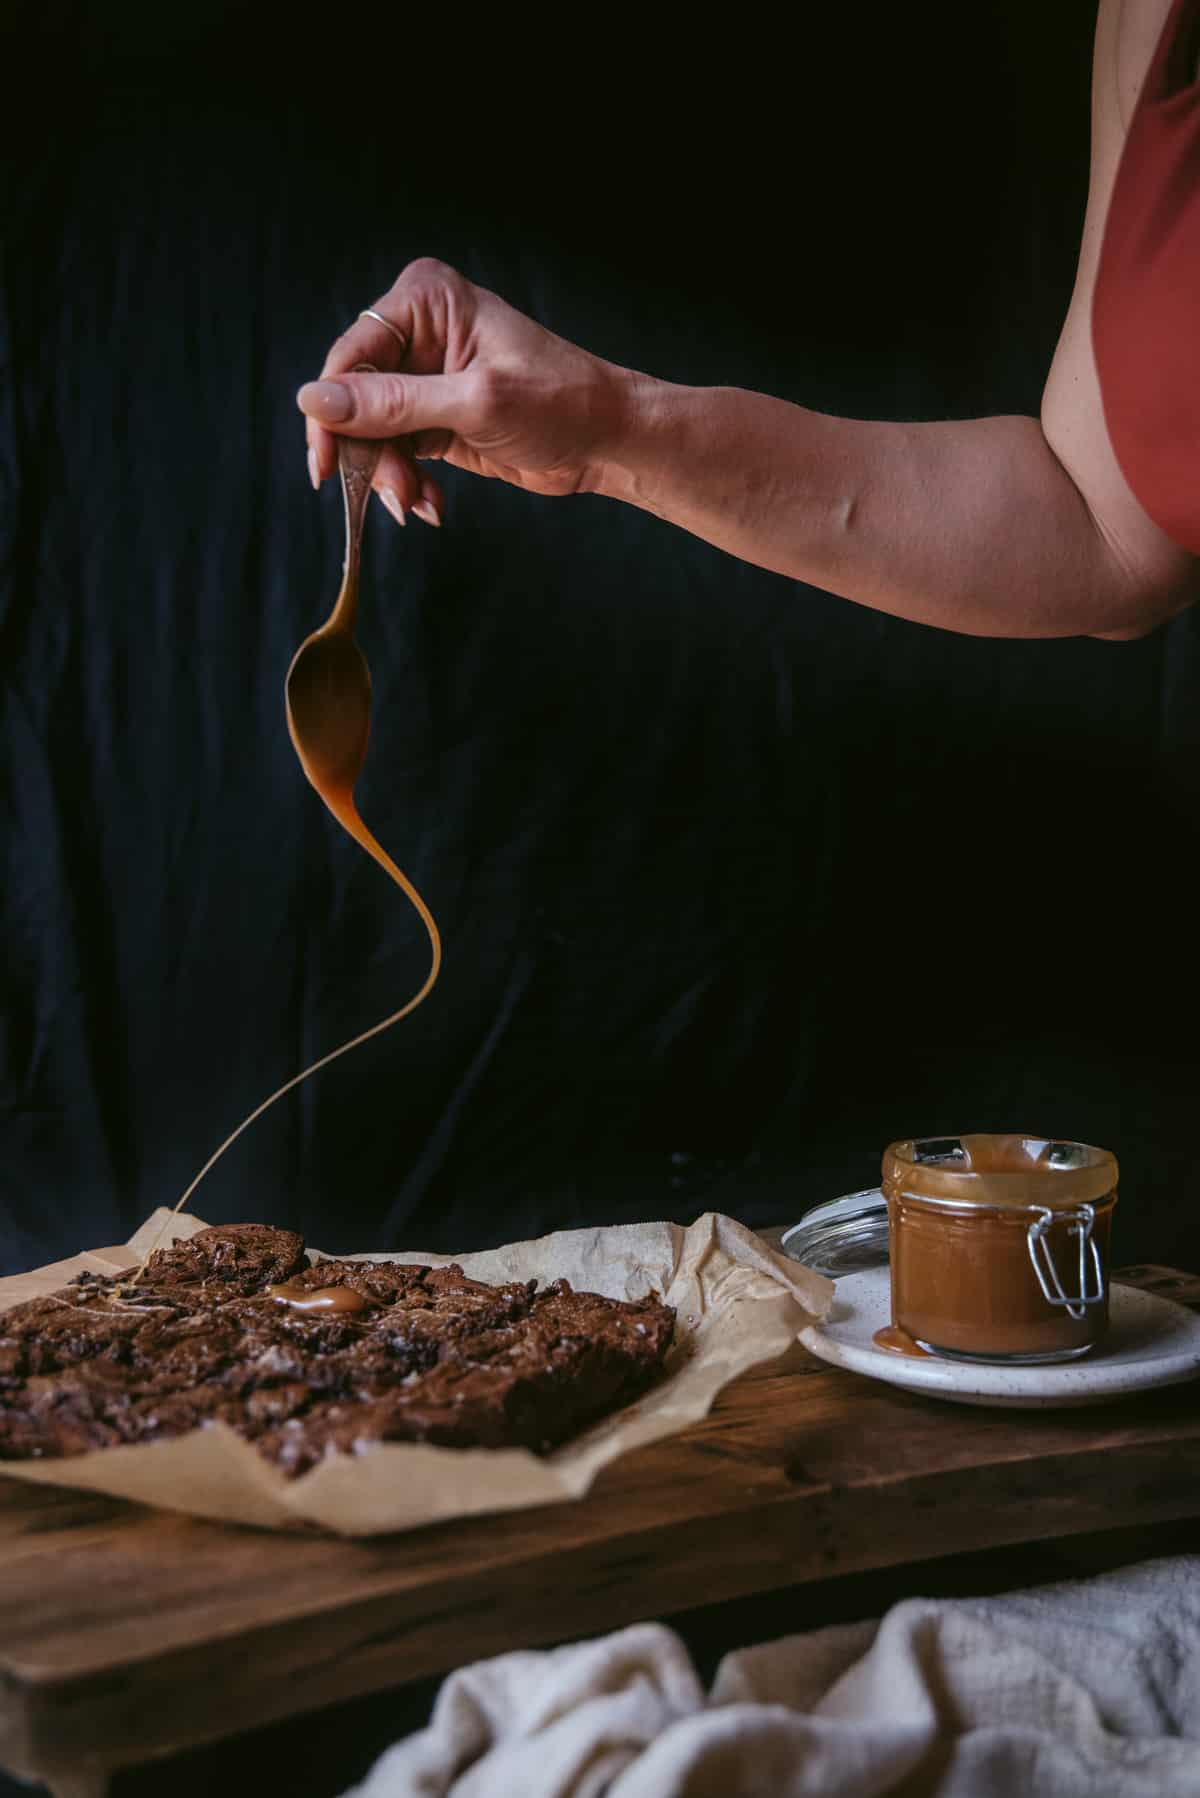 The brownies have been baked and sliced but remain on the baking paper on top of a wooden table. The jar of salted caramel is placed on a white plate next to it. A hand holding a spoon is drizzling caramel all over the top of the brownies.